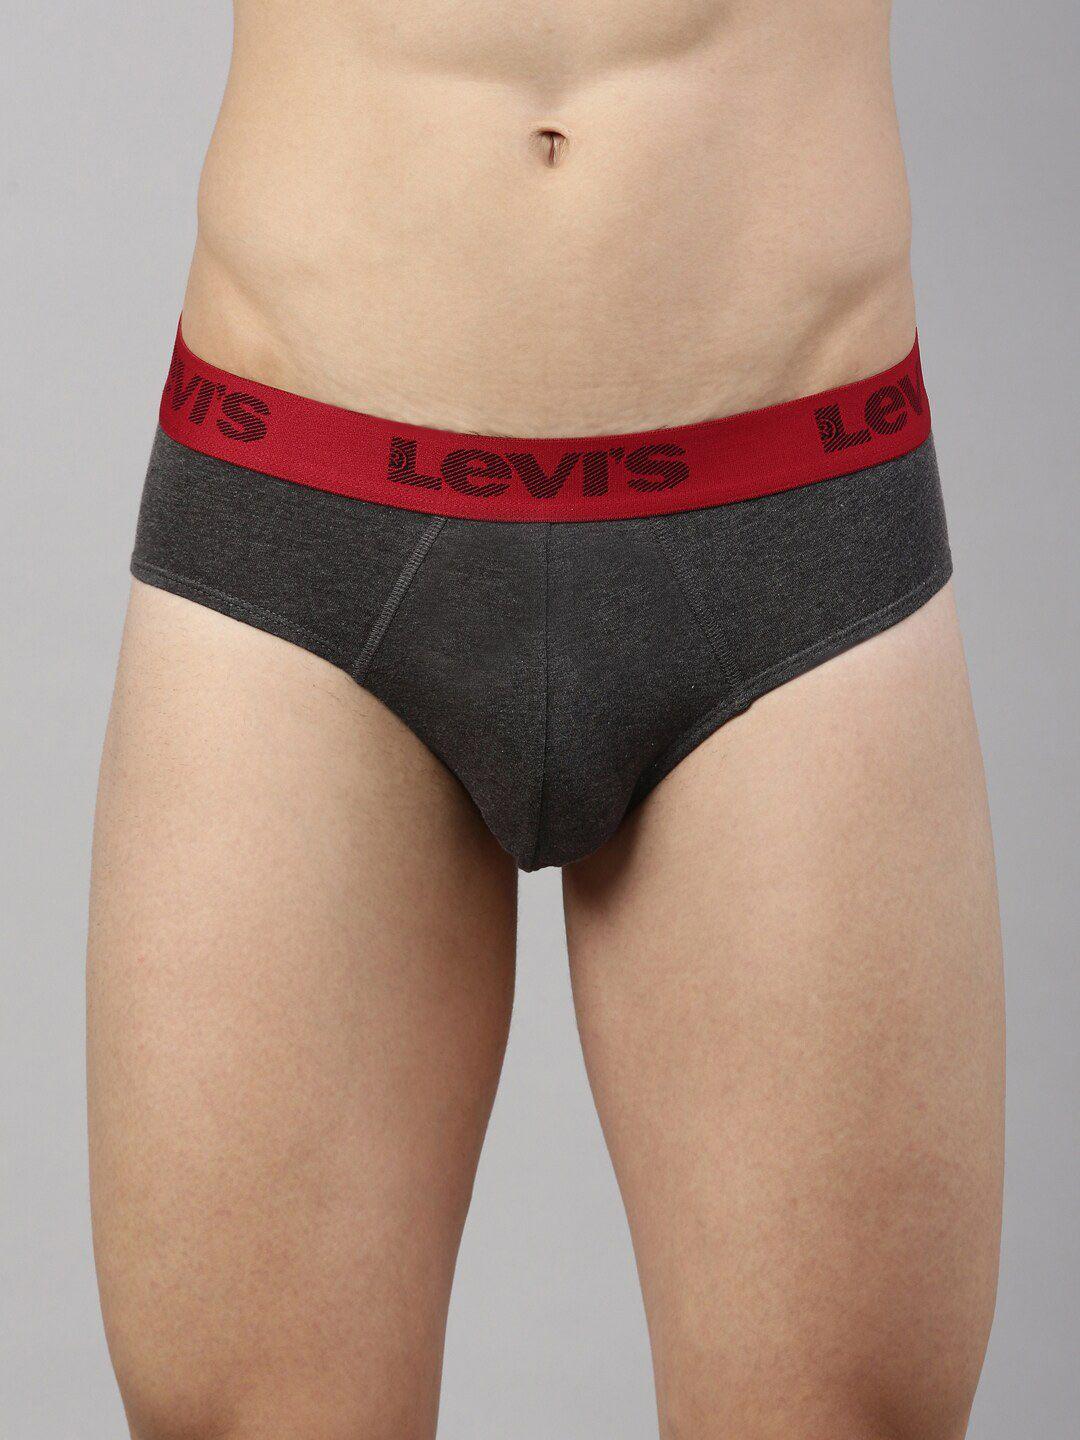 levis men smartskin technology cotton active briefs with tag free comfort-066